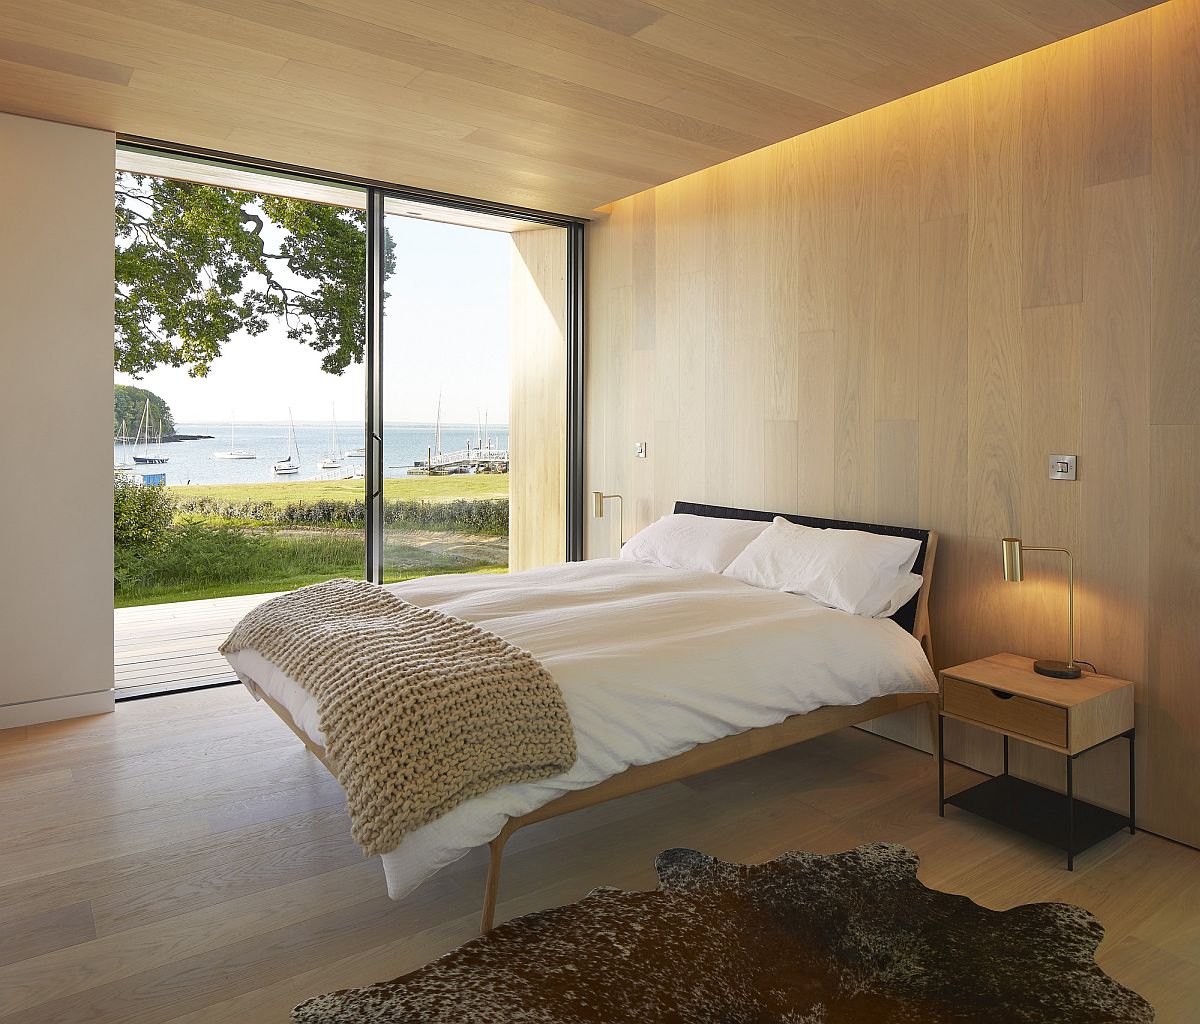 Wooden-walls-and-ceiling-along-with-cozy-lighting-and-wonderful-English-Channel-views-for-the-bedroom-57661